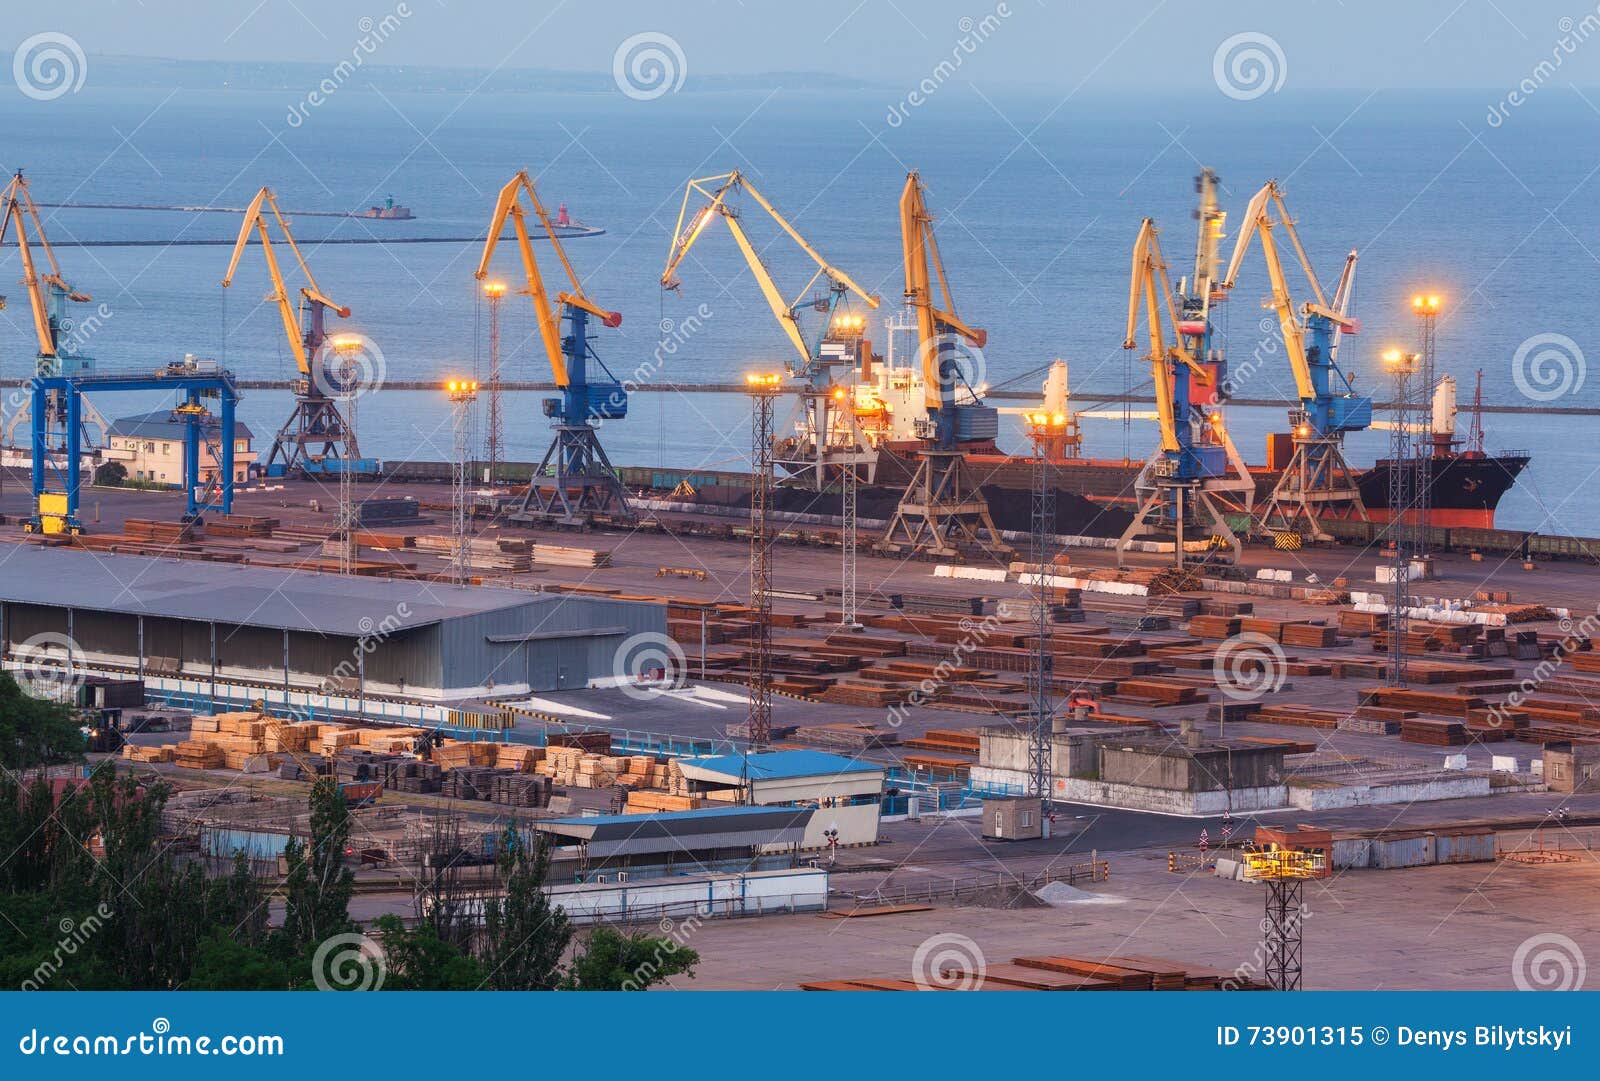 sea commercial port at night in mariupol, ukraine. industrial view. cargo freight ship with working cranes bridge in sea port at